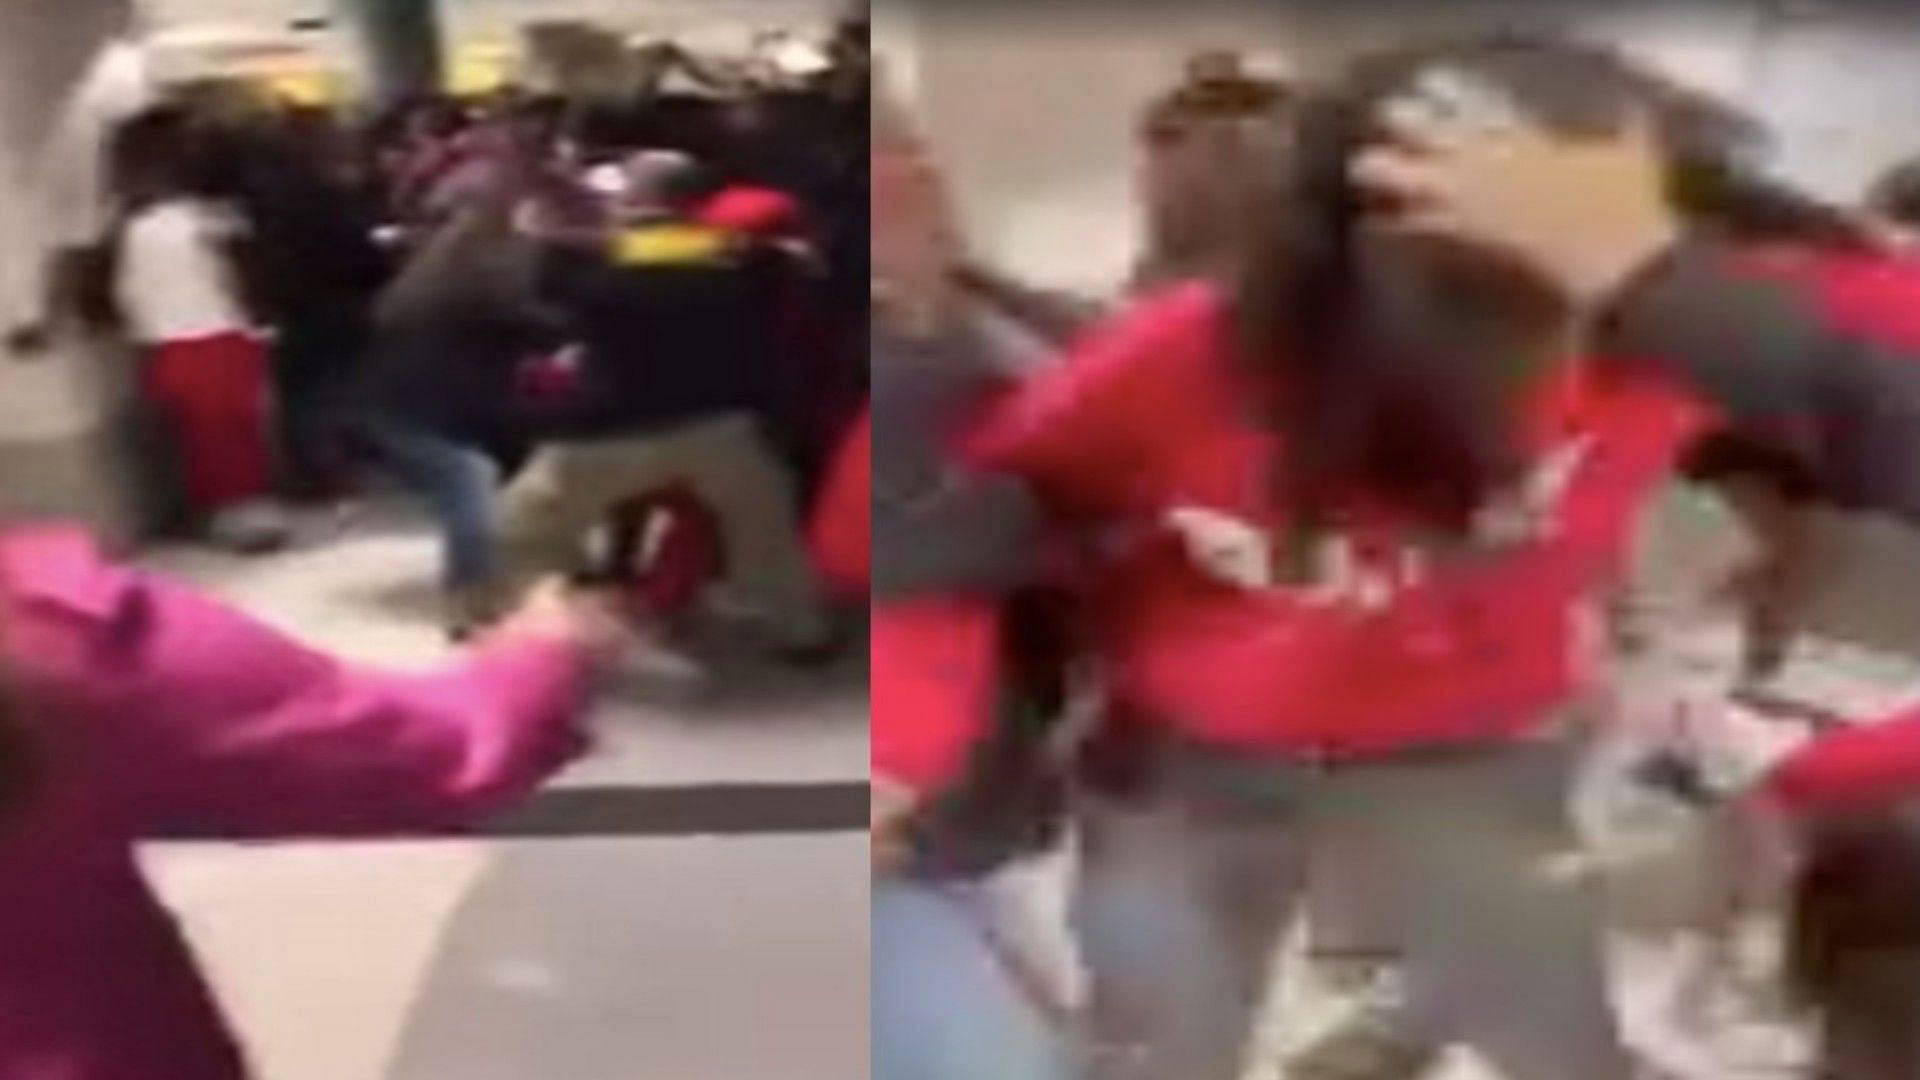 "Expel them all" Alton High School fight video goes viral, sparks